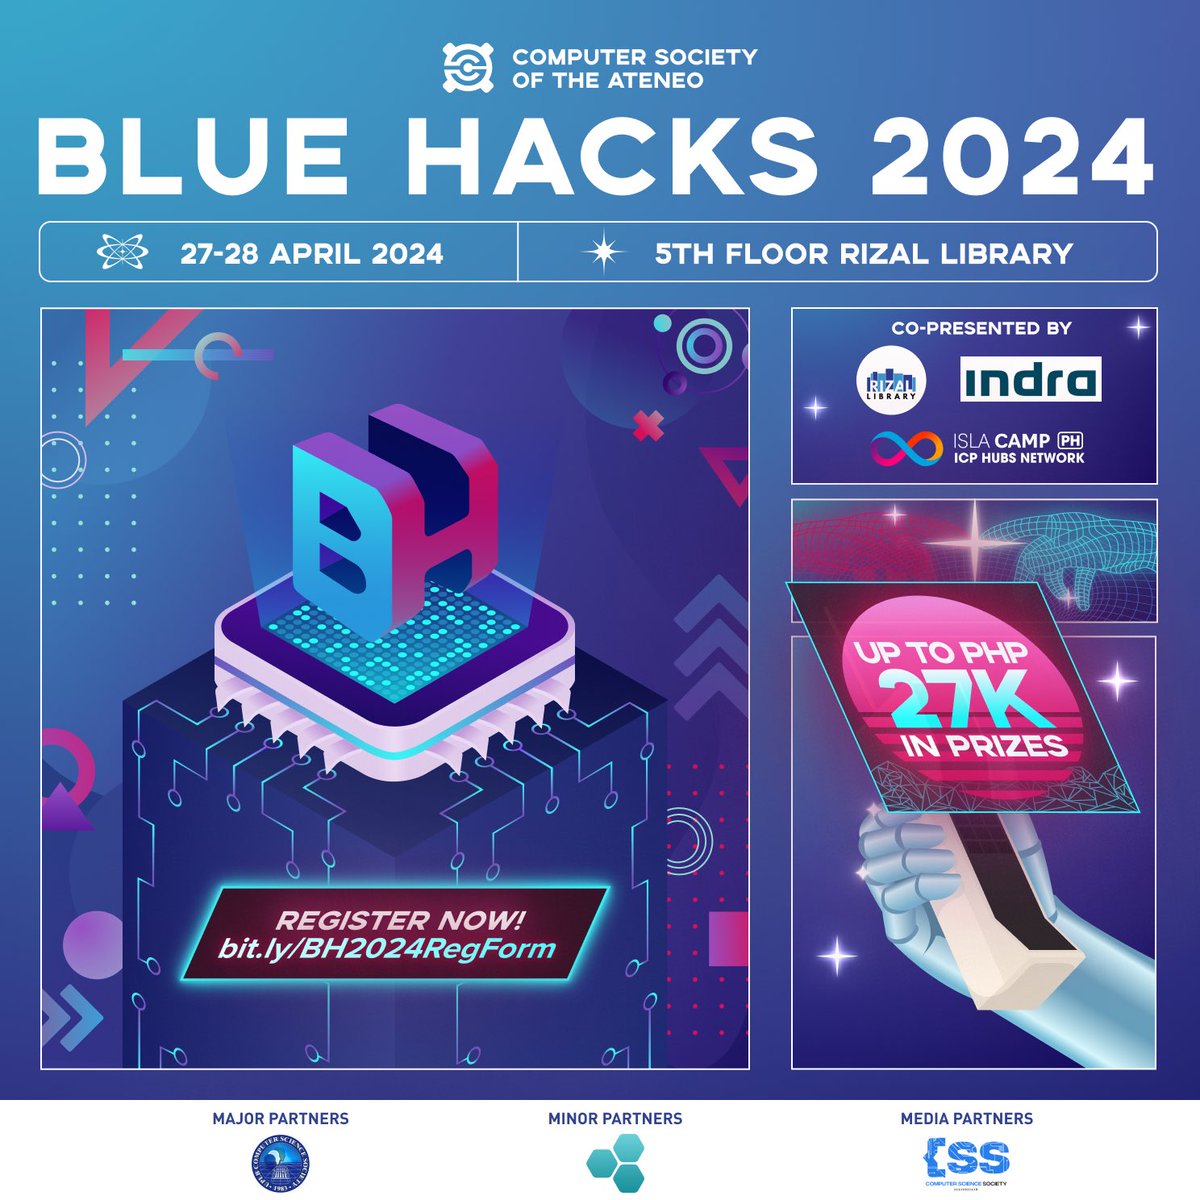 🚀 Attention all student developers at Ateneo de Manila University BLUE HACKS 2024 Hackathon! Join us LIVE as we unleash the power of #Web3 and the #InternetComputer Protocol at iThink Code Camp on the 5th Floor of Rizal Library. 🧑‍💻👩‍💻 Don’t miss the 24-48hr Hacker House…